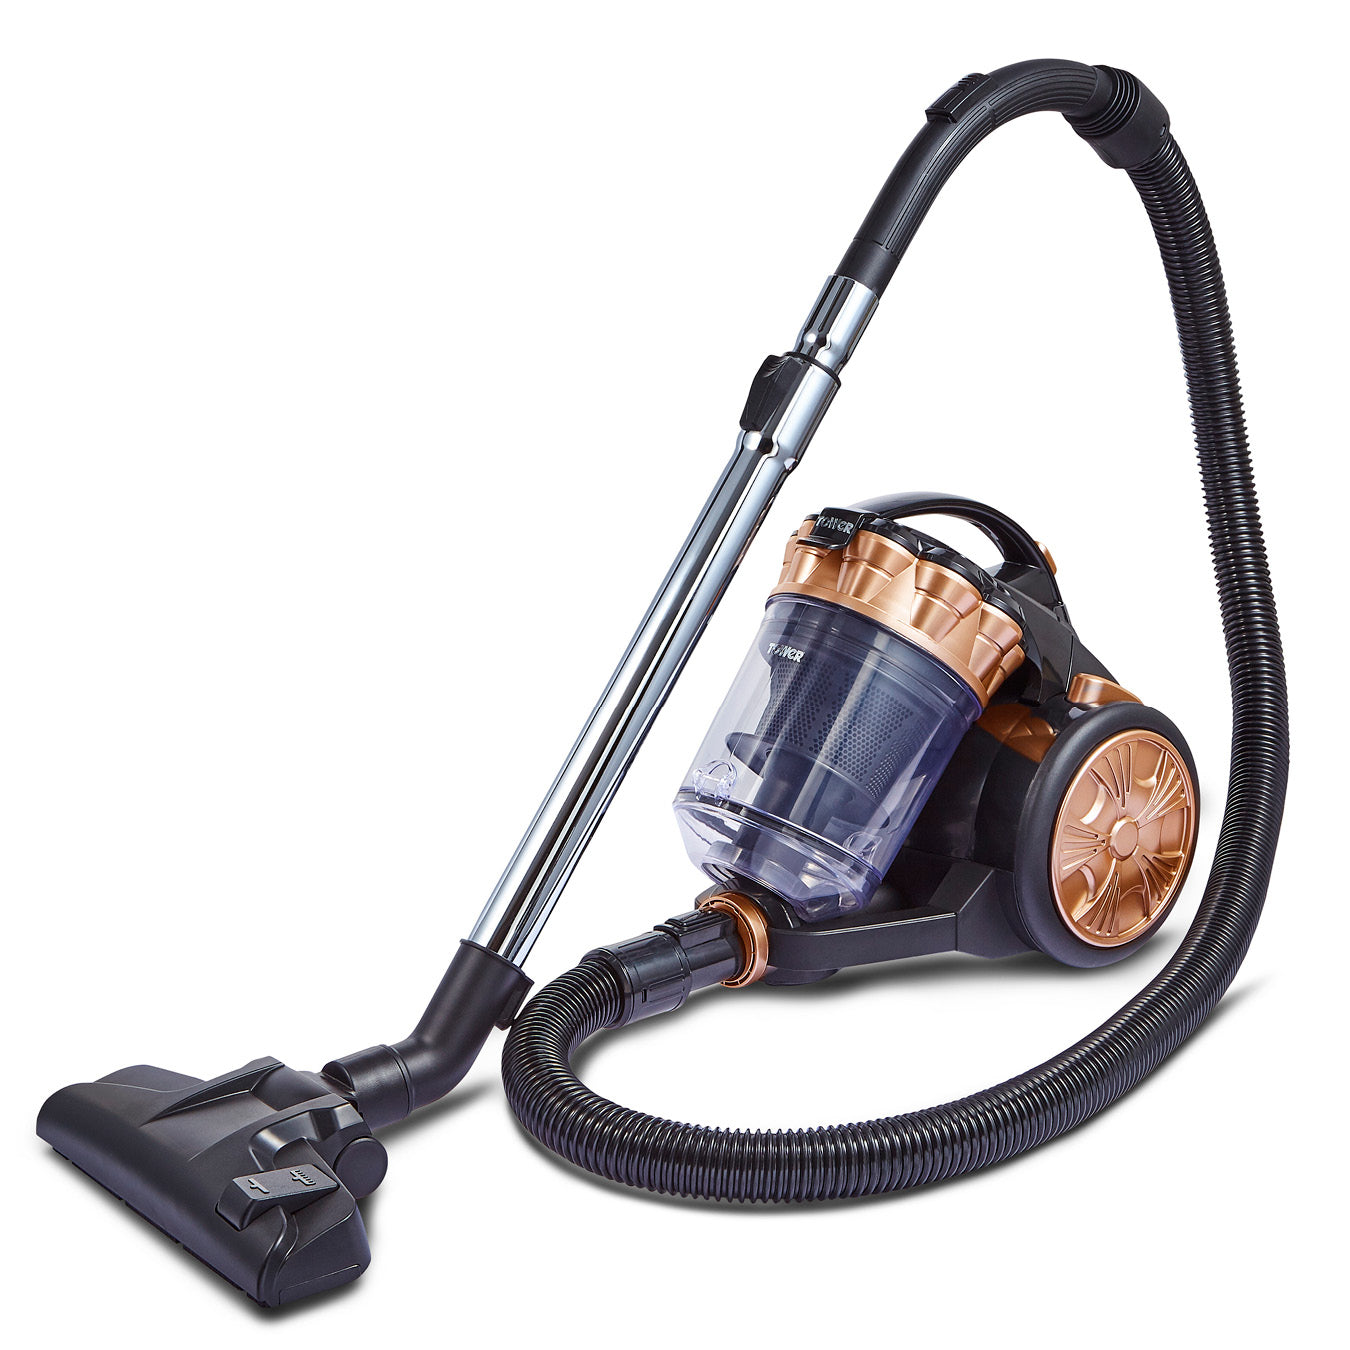 Tower RXP10PET Multi Cyclonic Cylinder Vacuum Cleaner  | TJ Hughes